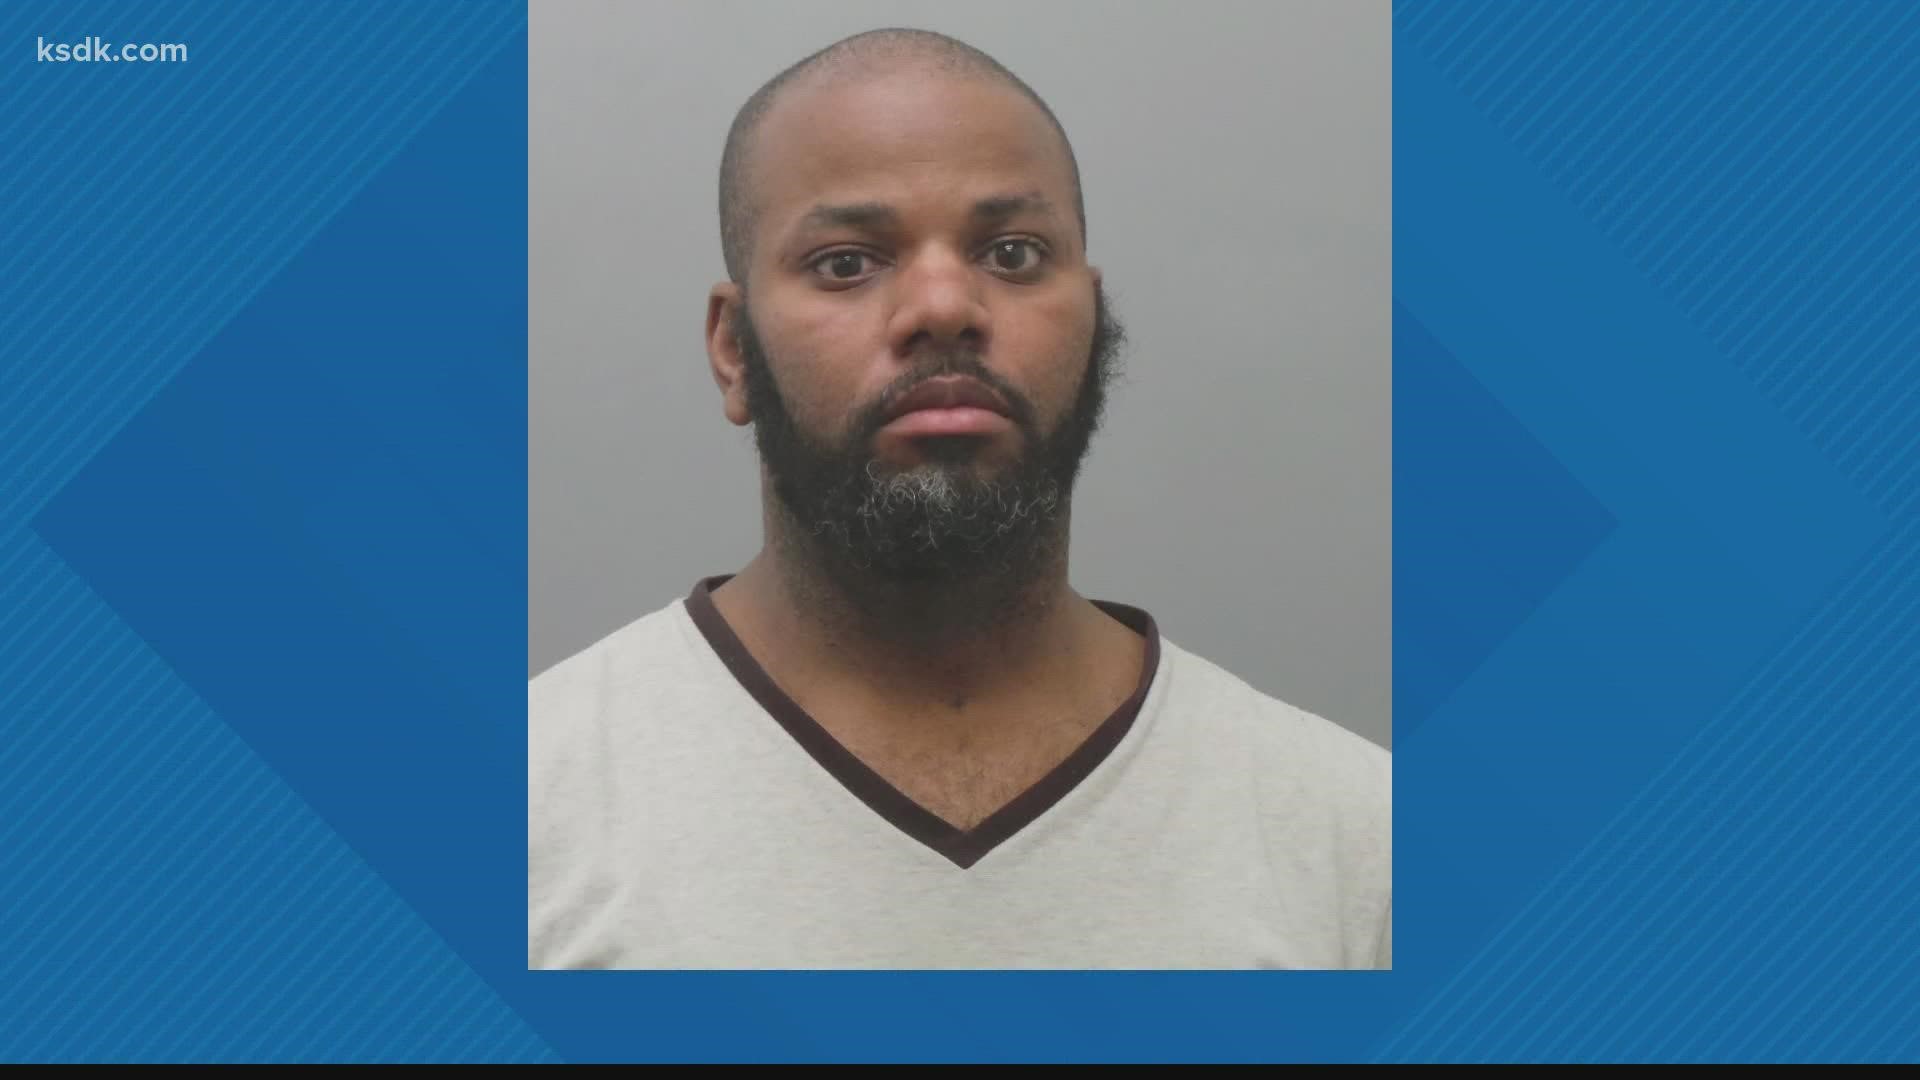 37-year-old Leon Bell of St. Louis is spending the night in jail on serious accusations he sexually molested two 11-year-old girls.